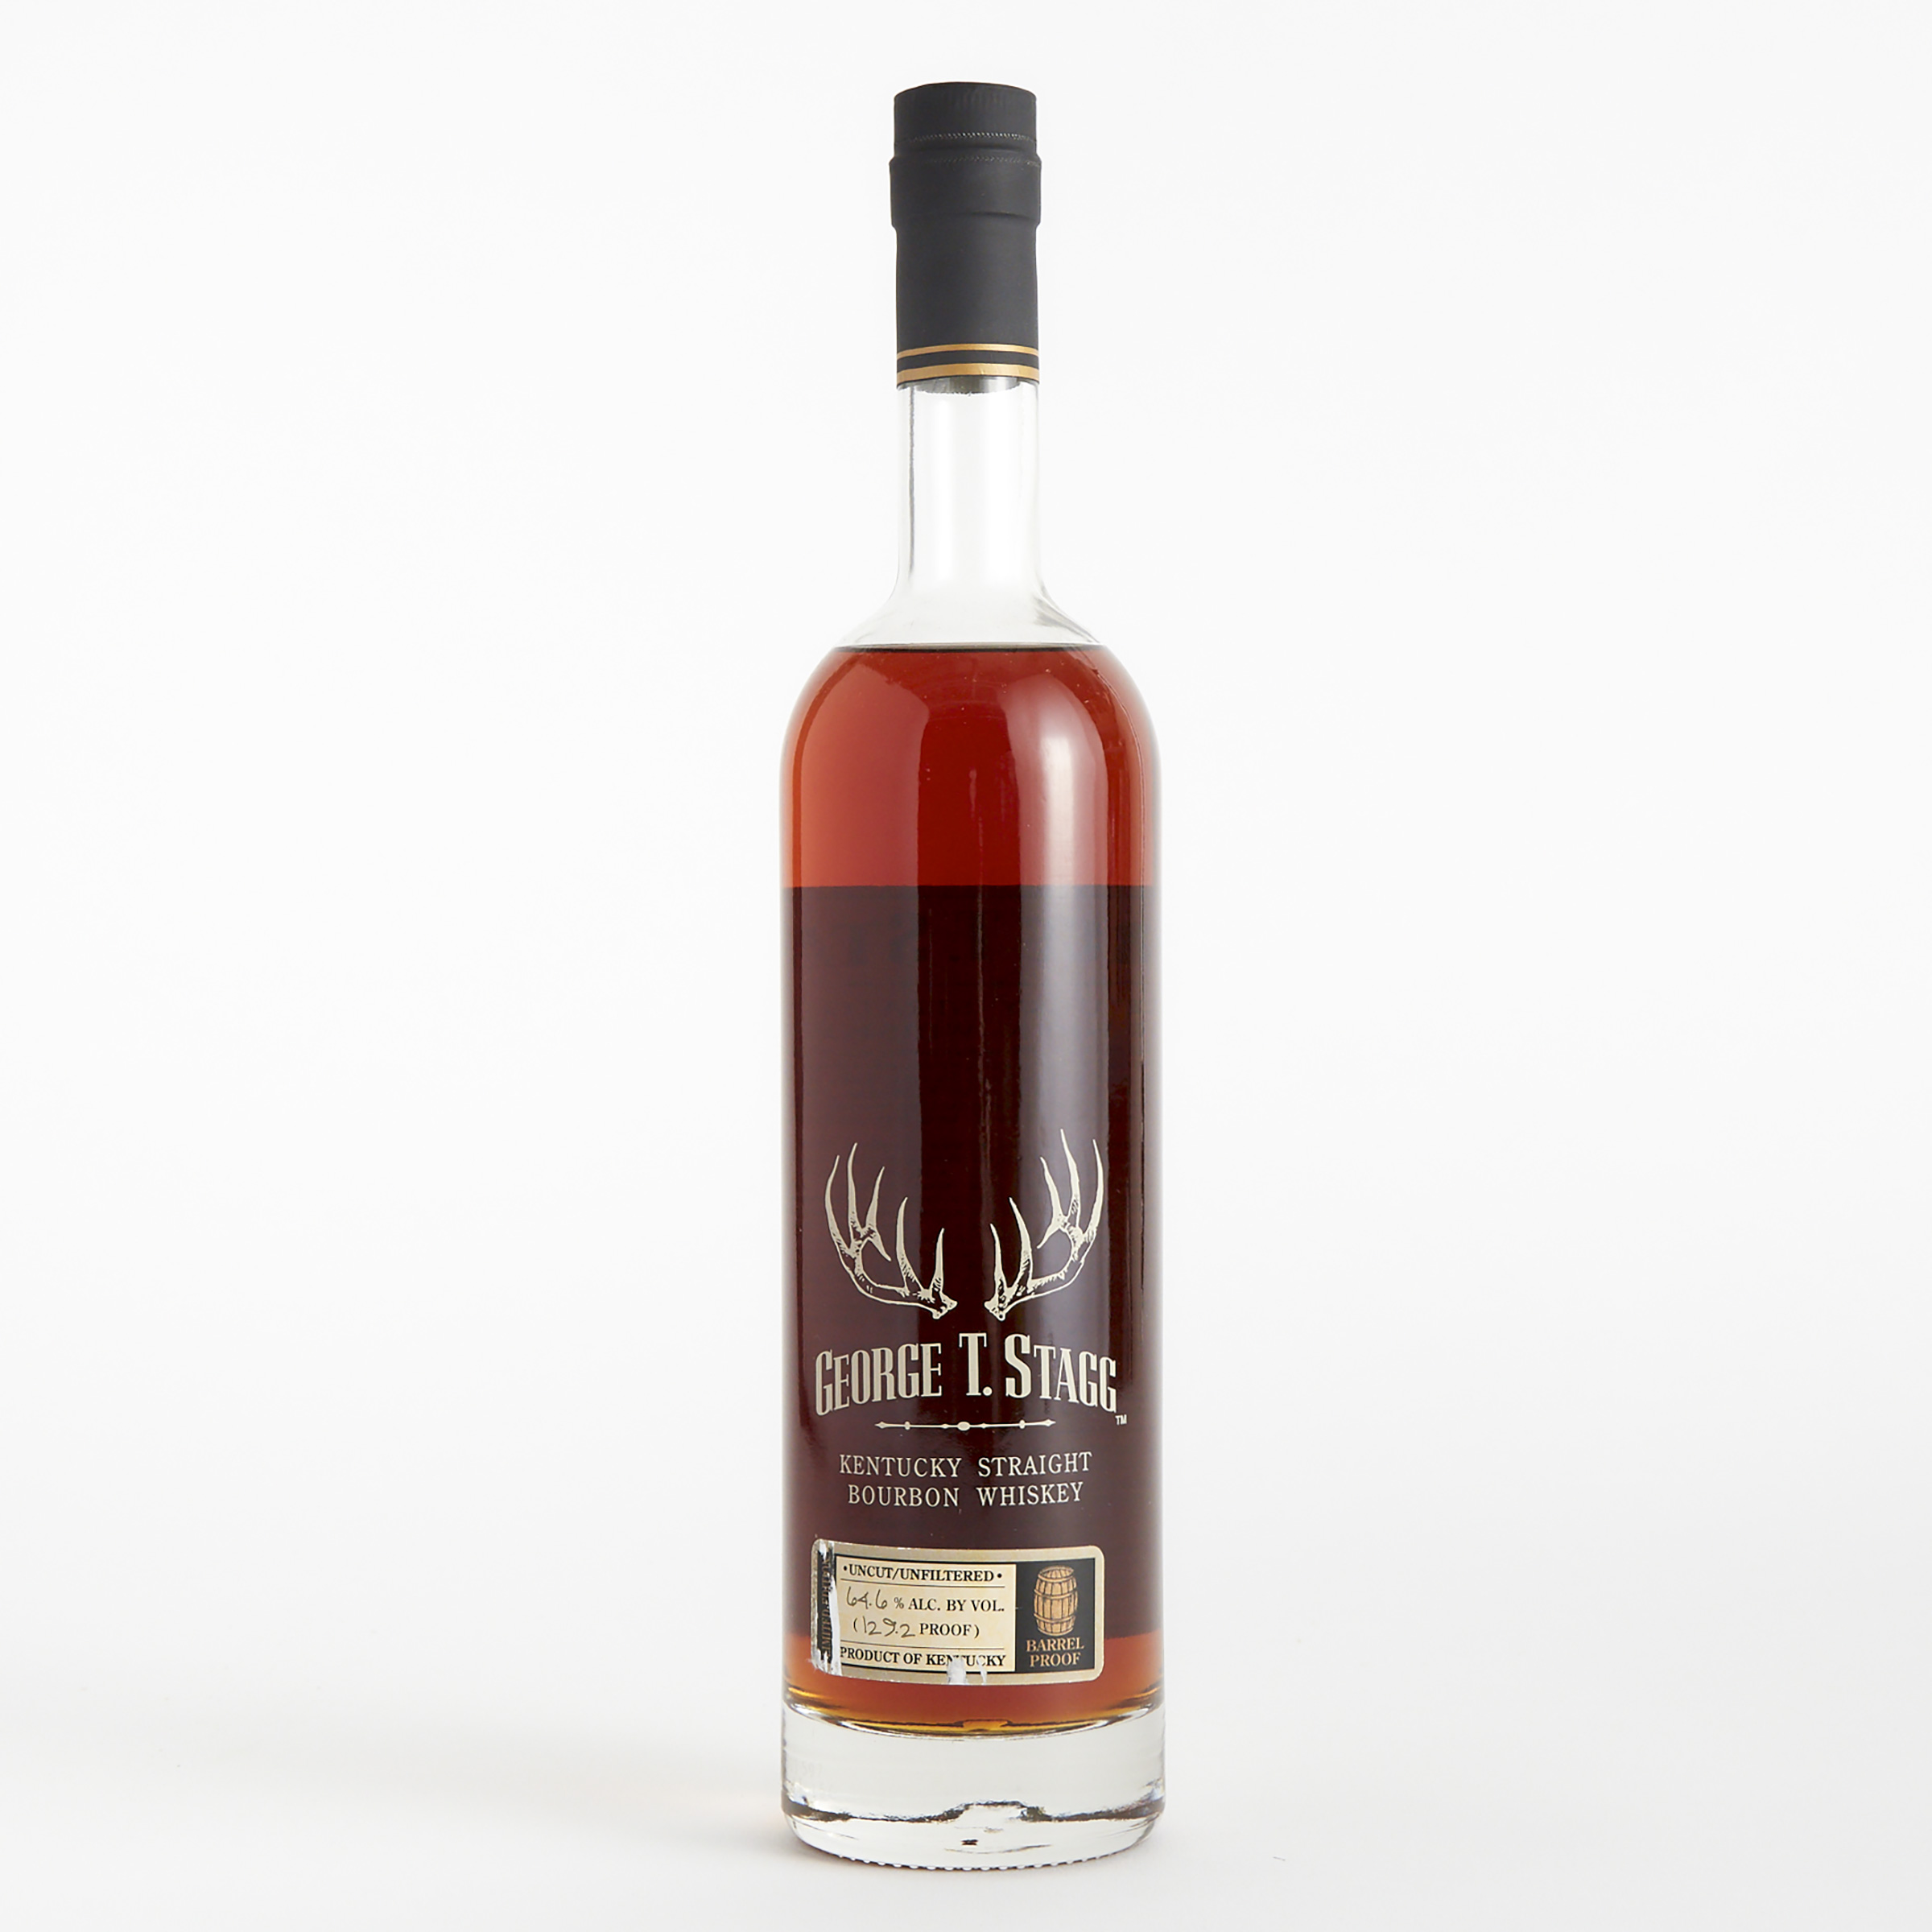 GEORGE T. STAGG KENTUCKY STRAIGHT BOURBON WHISKEY NAS (ONE 750 ML)